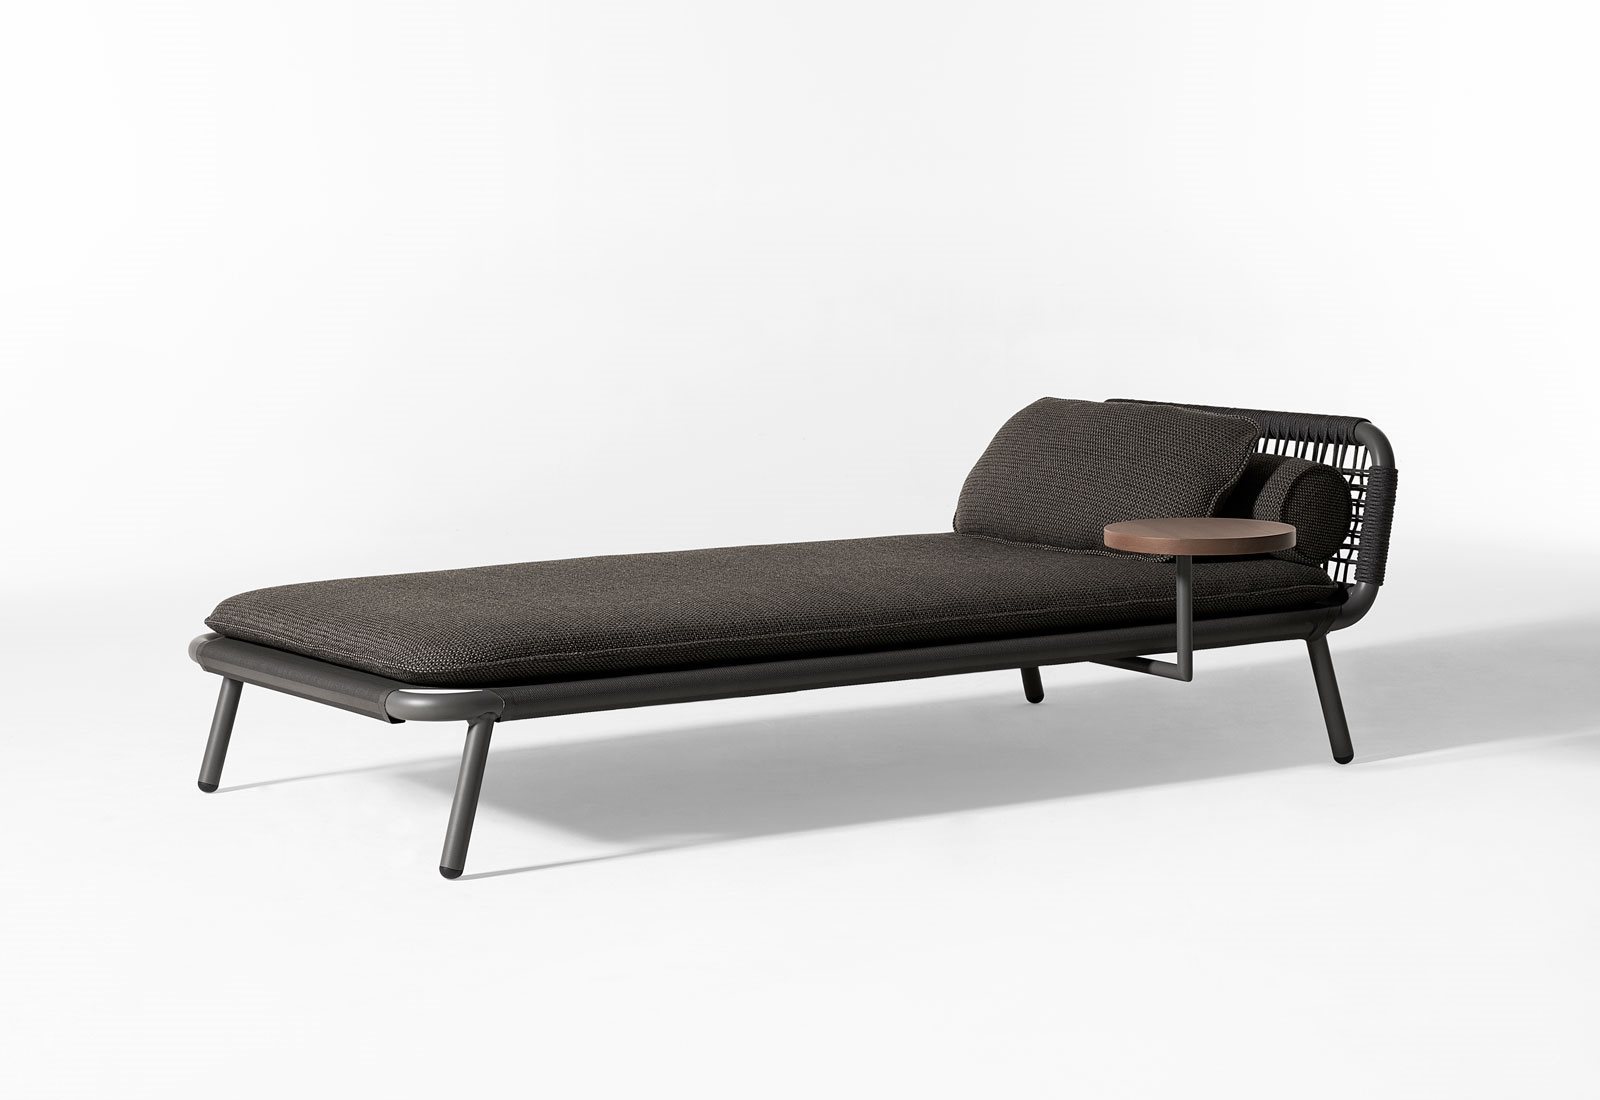 Noa-open-air-lounge-bed-05-1600x1100